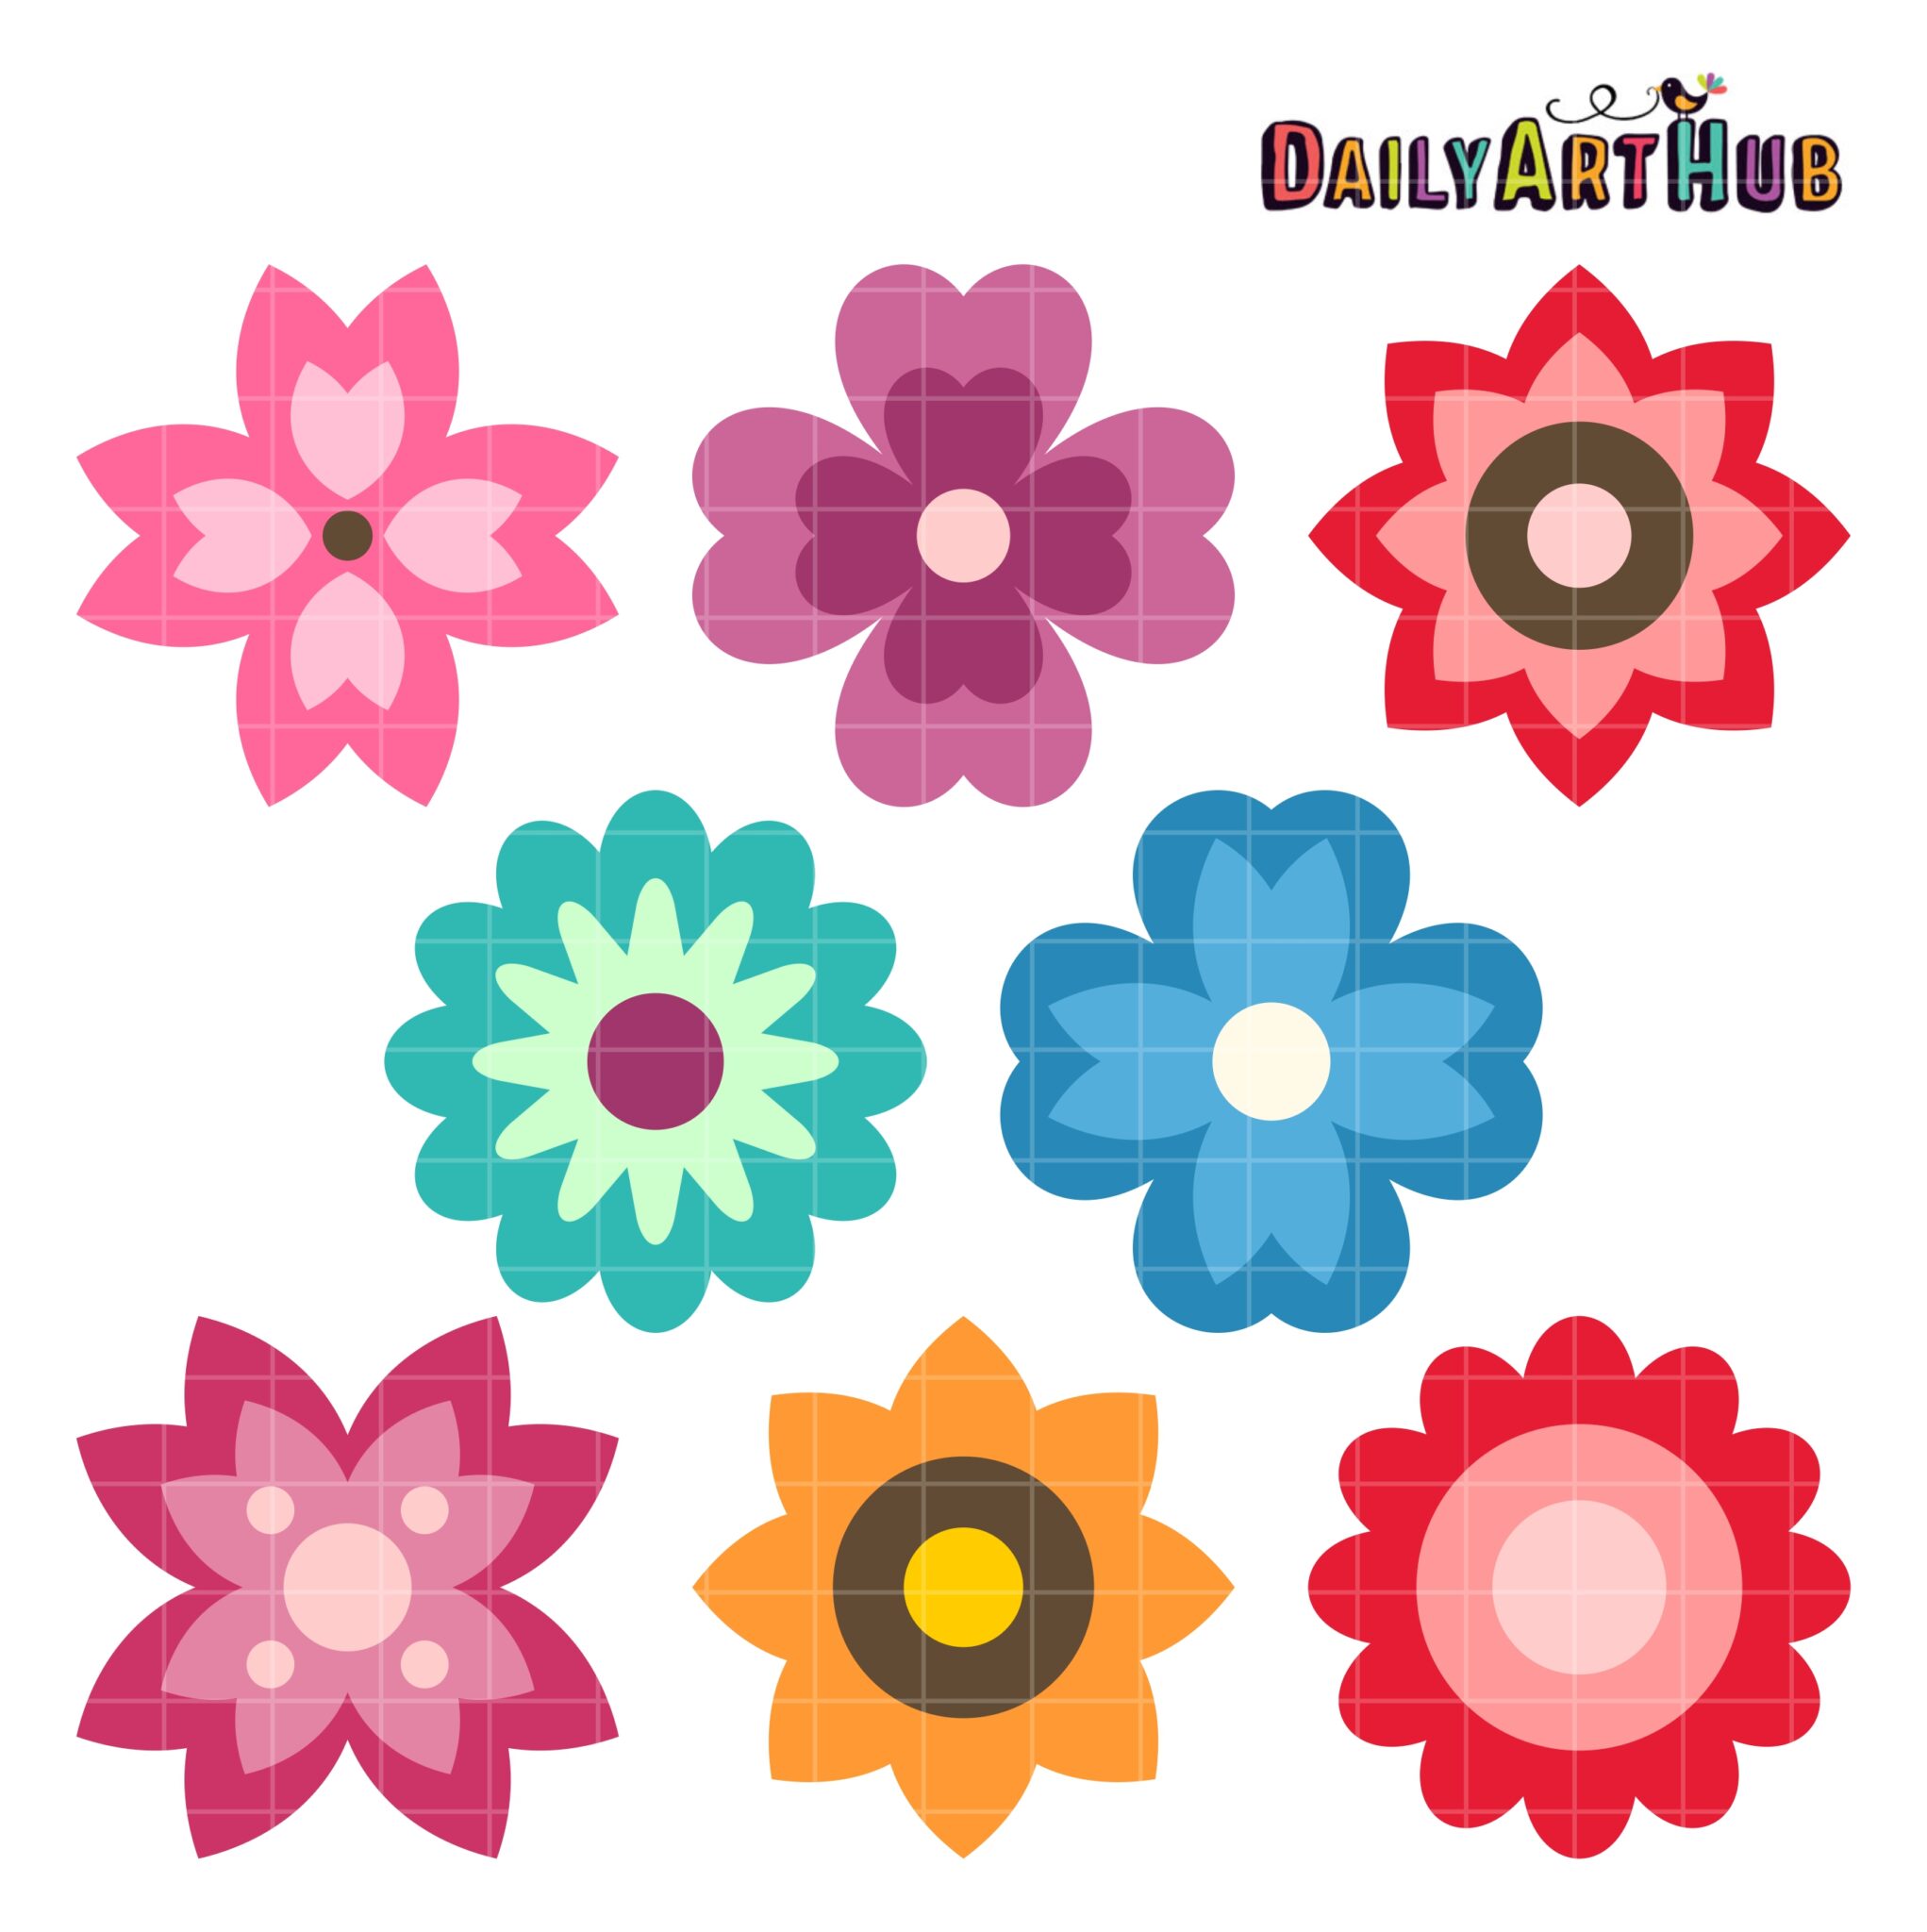 spring flowers clipart